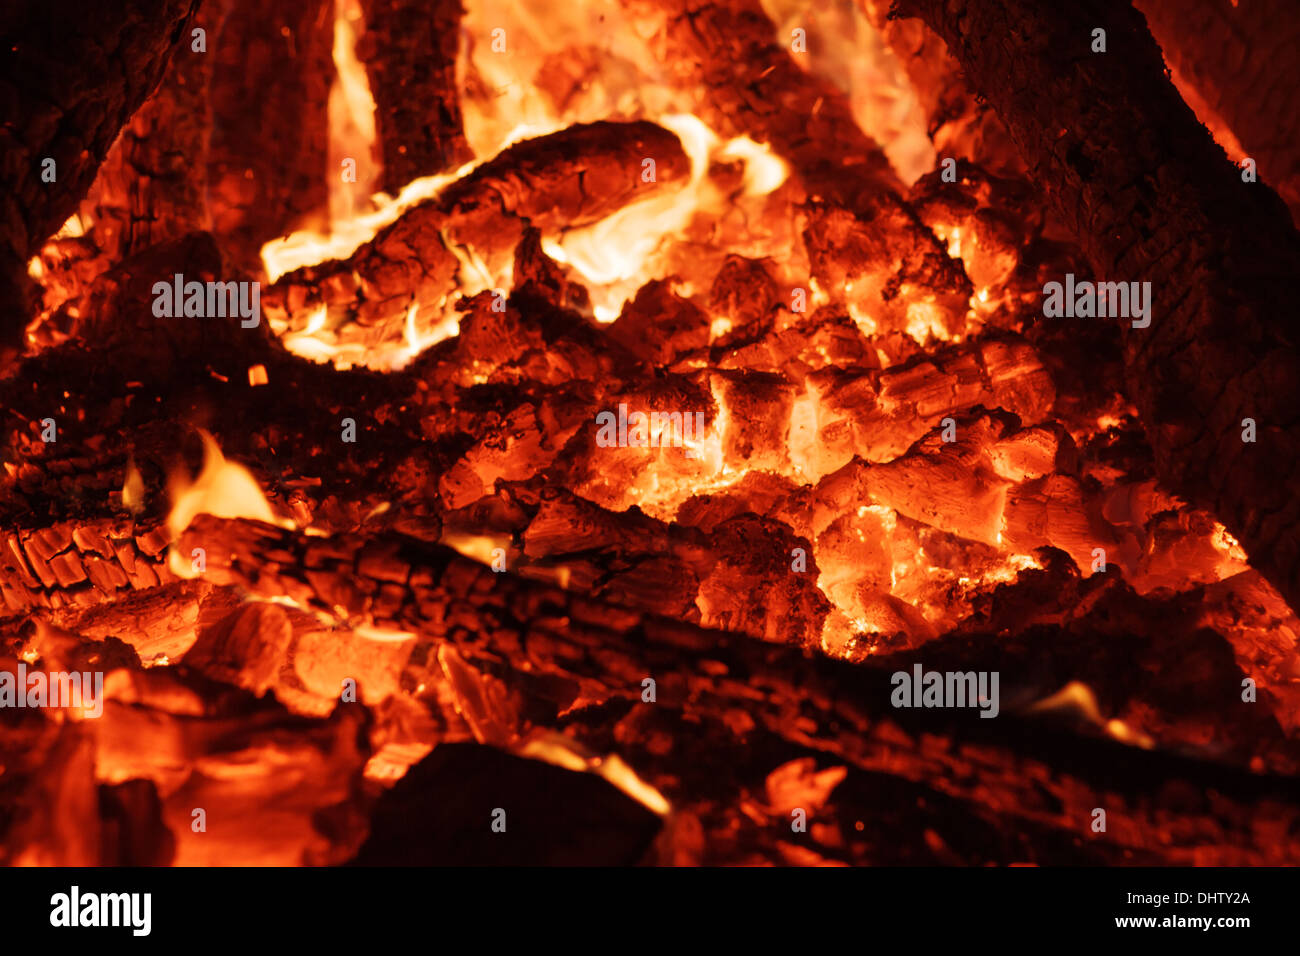 Flaring heat fire and coals Stock Photo